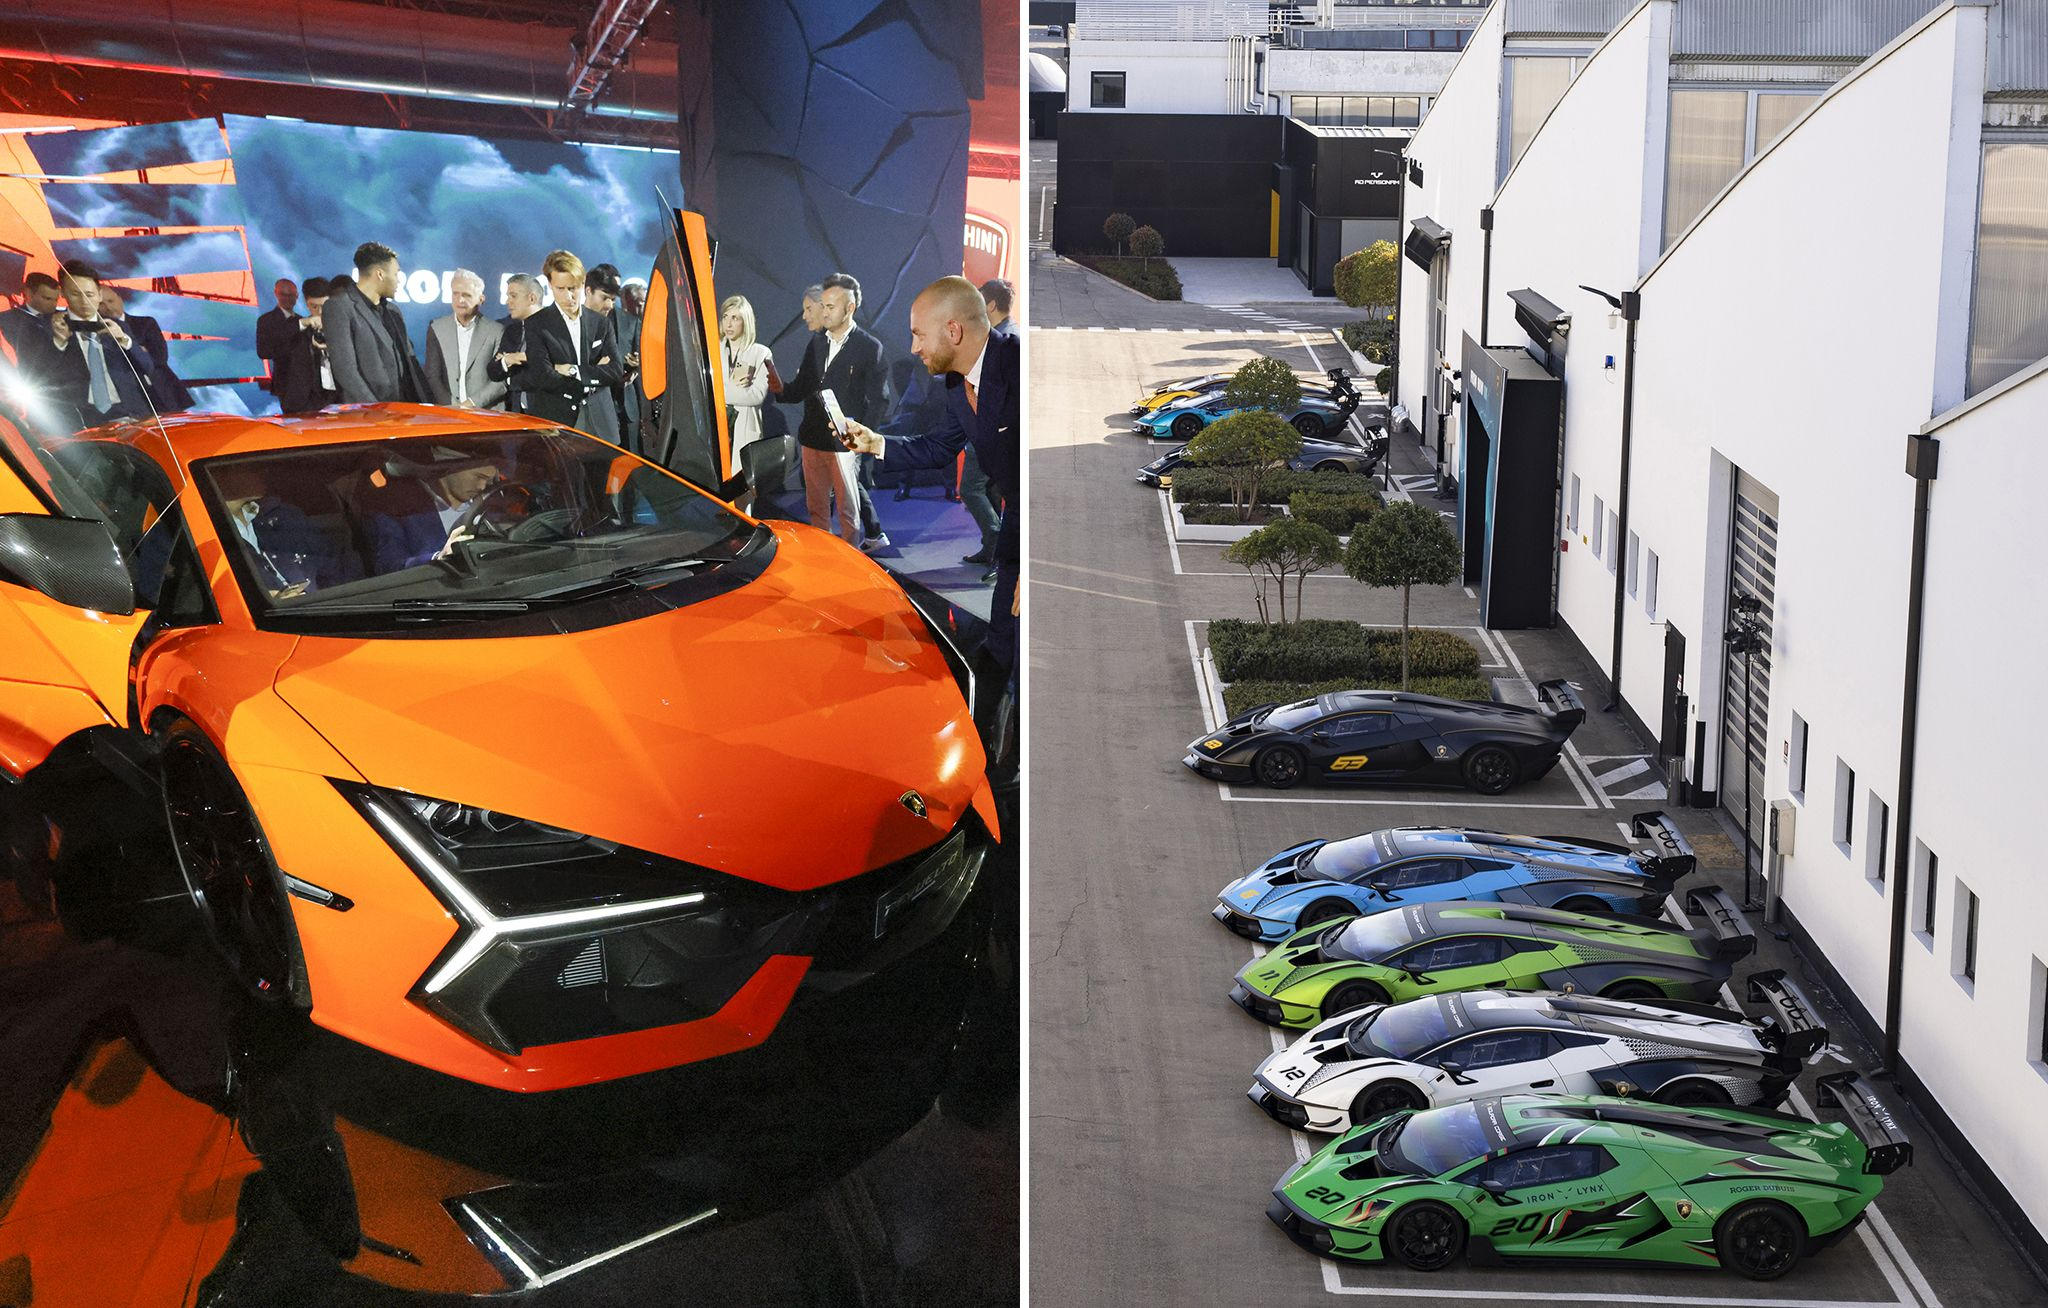 cChic Magazine Suisse - Lamborghini - The first super sports V12 hybrid HPEV, unveiled to media, owners and celebrities 